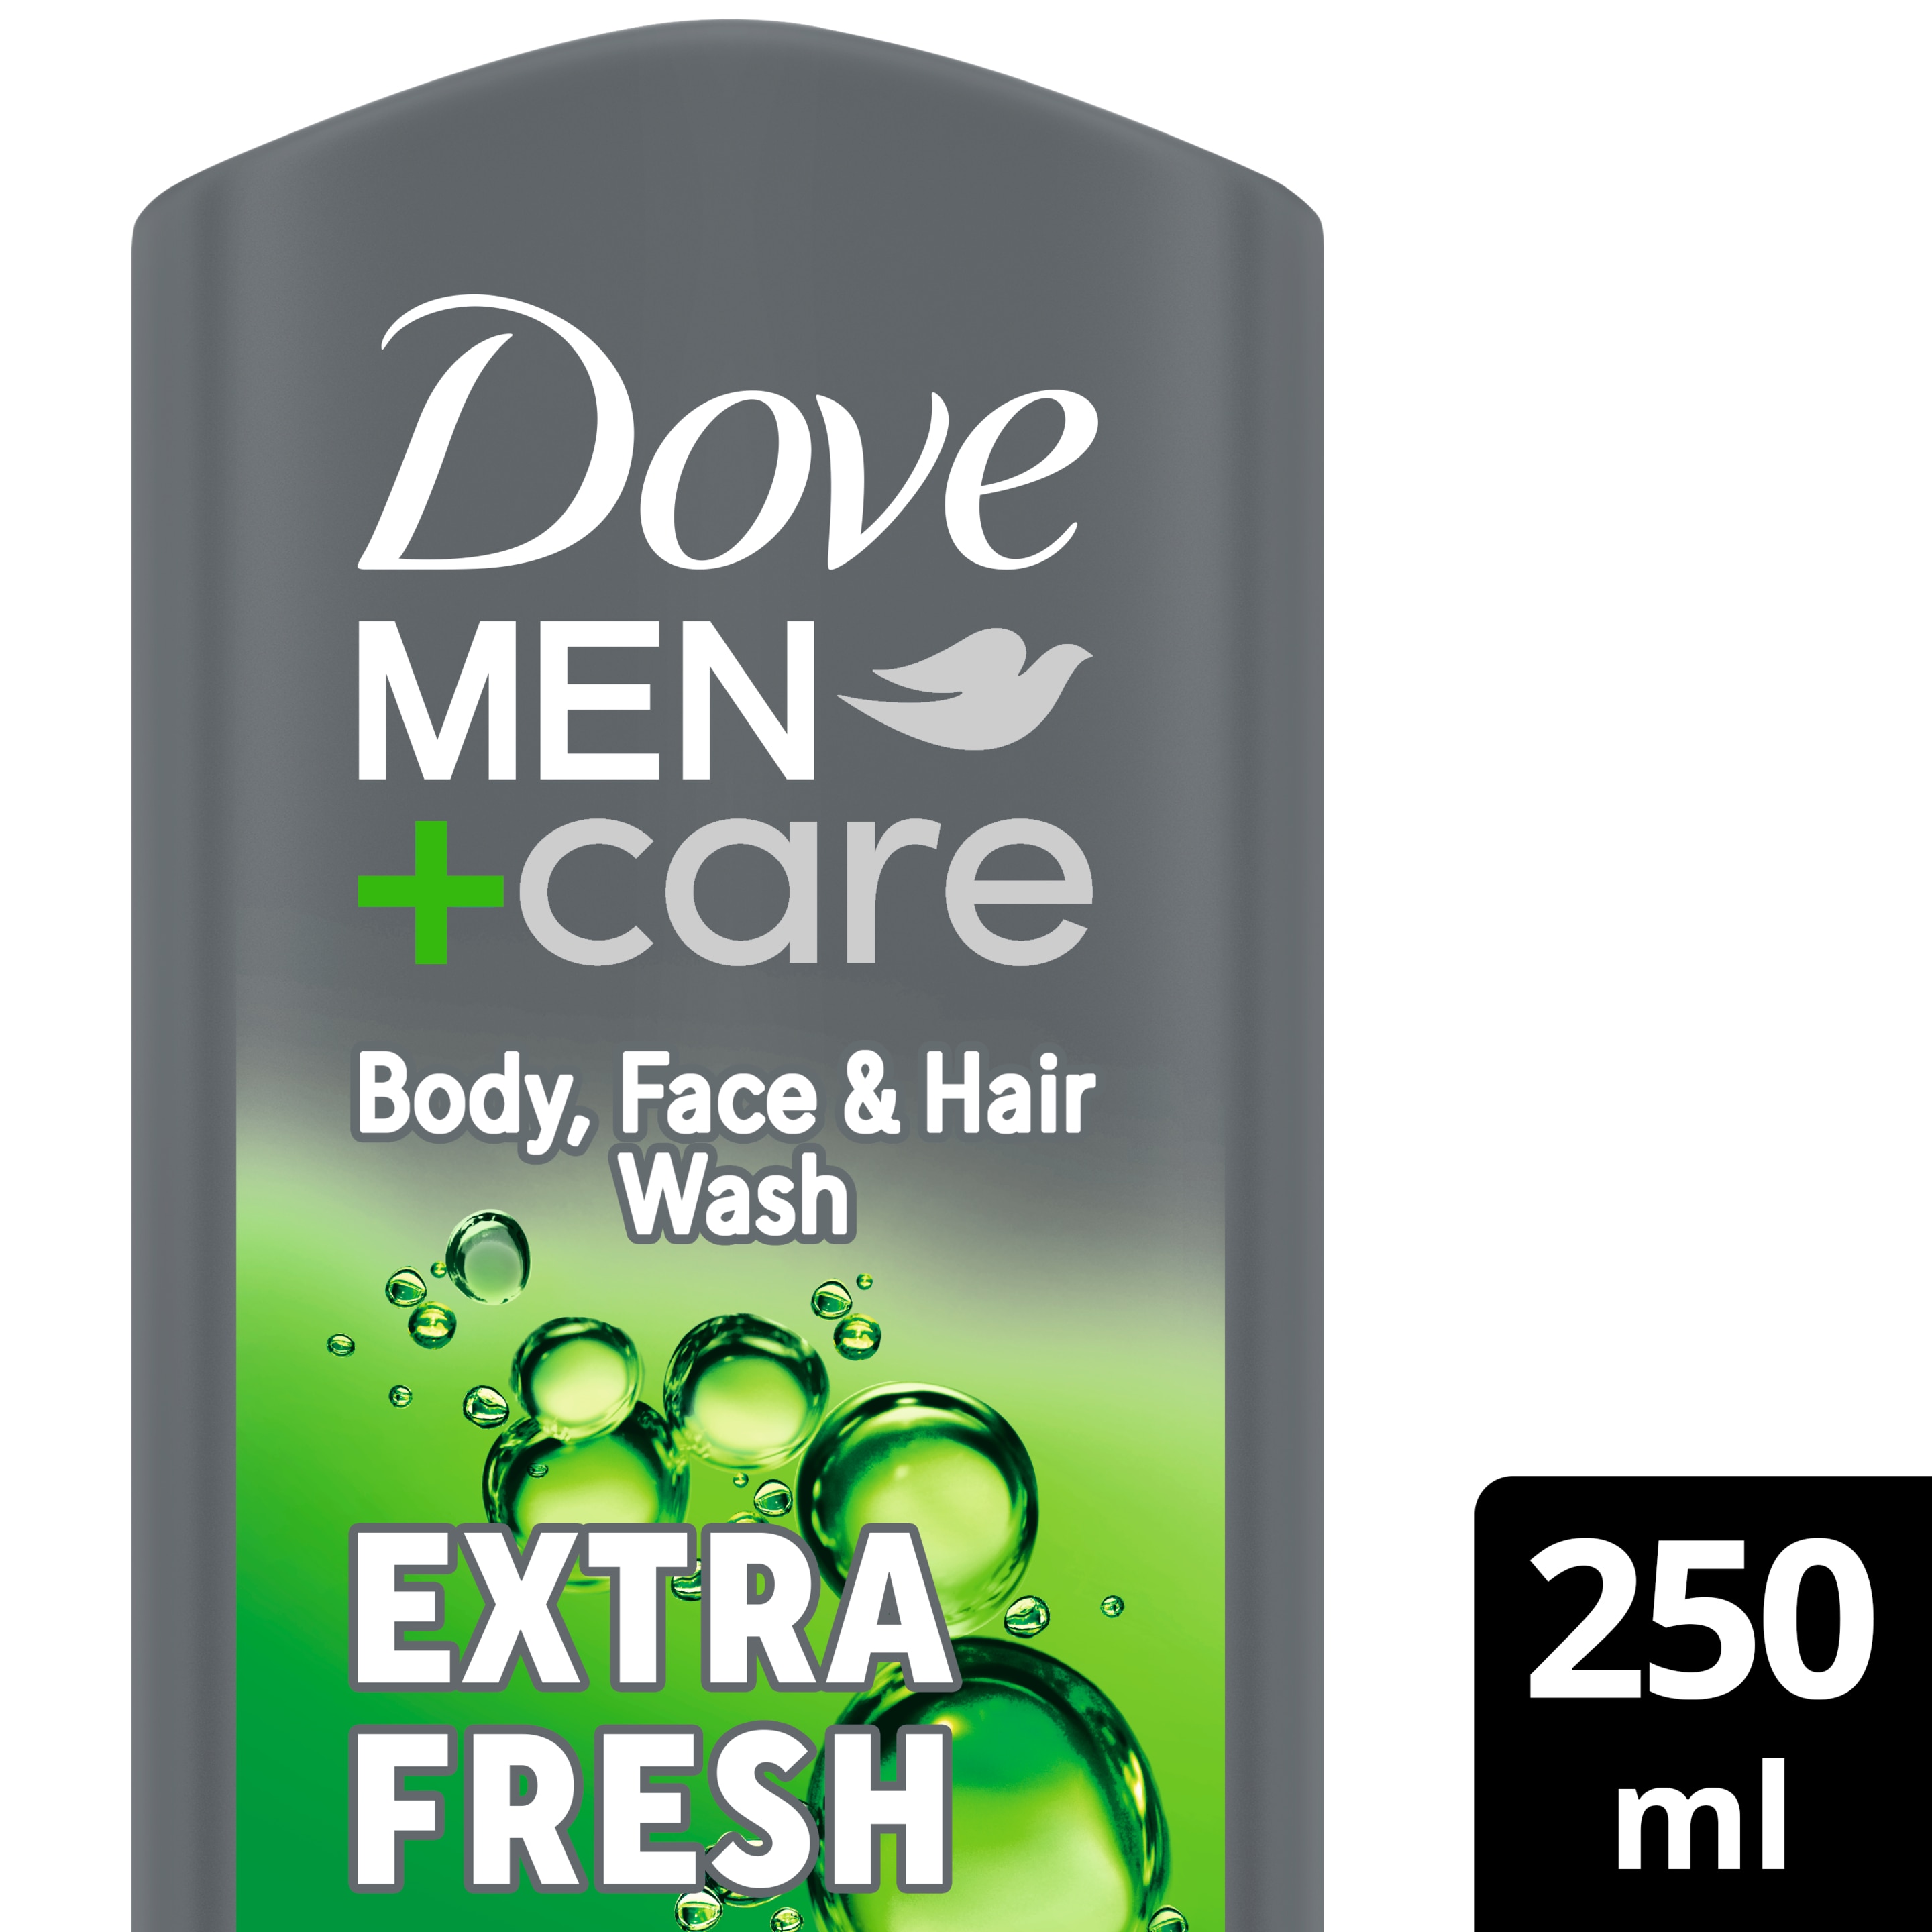 Dove Men+Care Refreshing Extra Fresh 3-in-1 Body, Face + Hair Wash